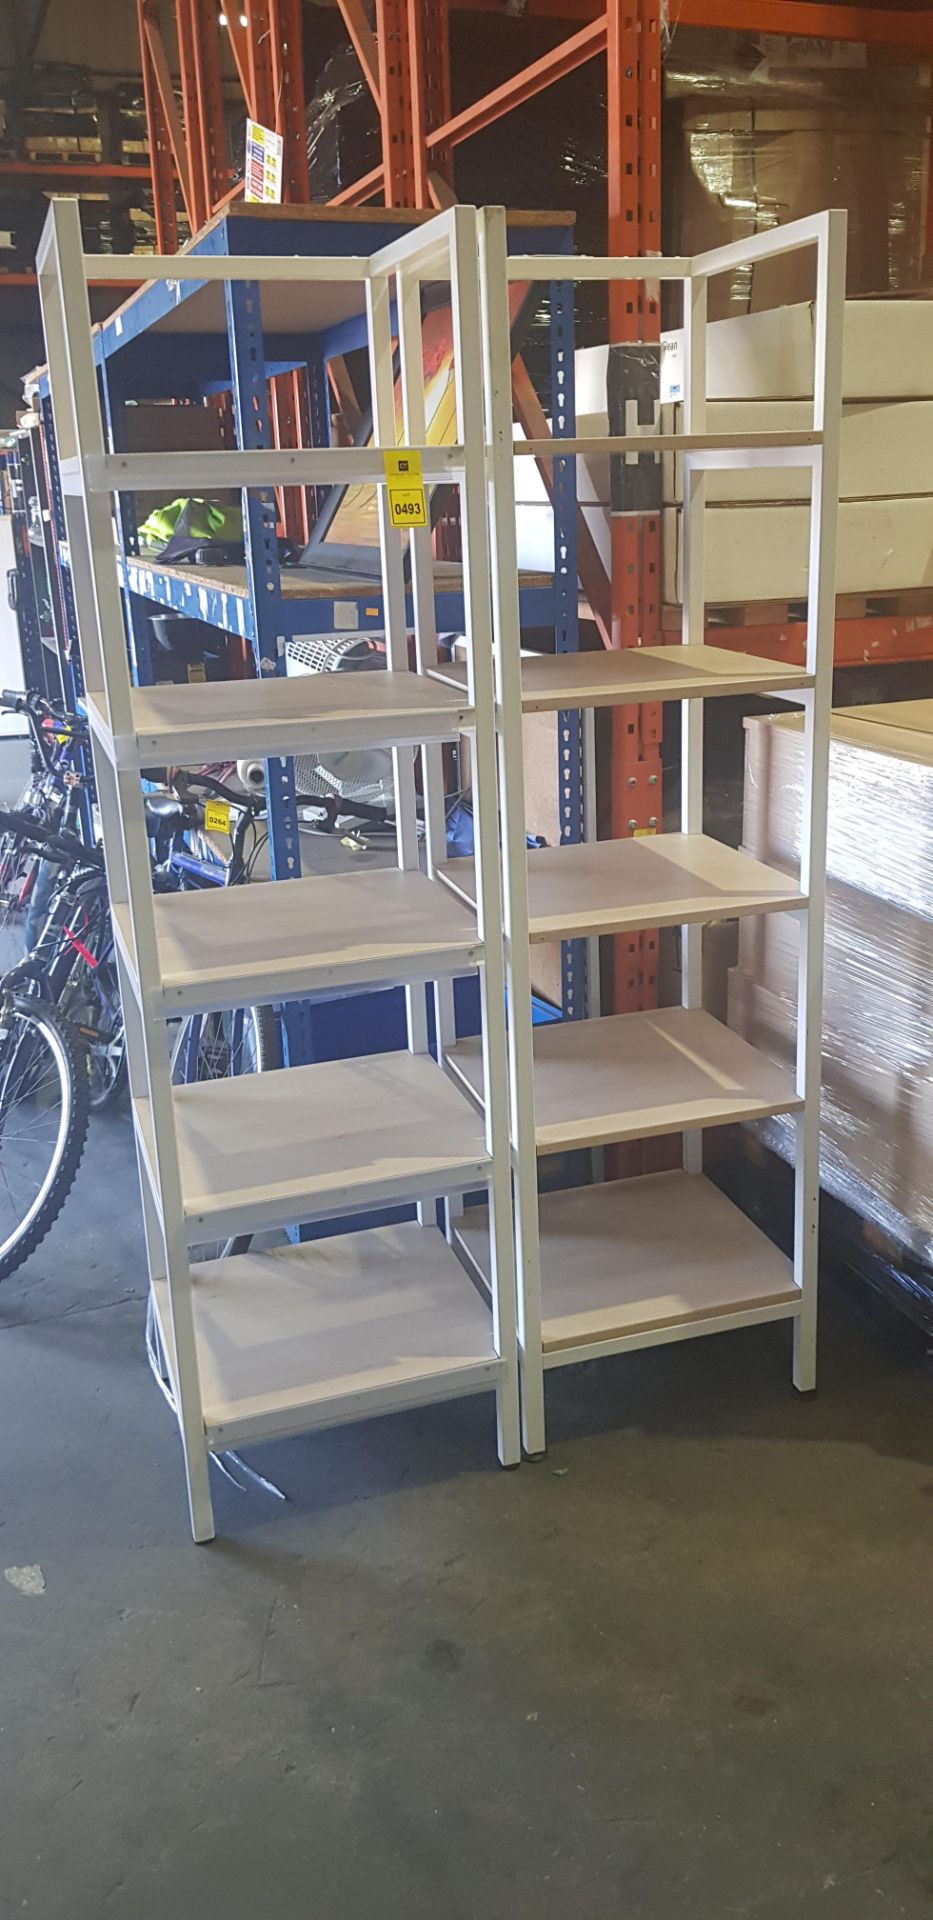 2 X 5 TIER SHELVING UNIT WITH WOODEN BOARDS H 190CM X D 50 W 53CM